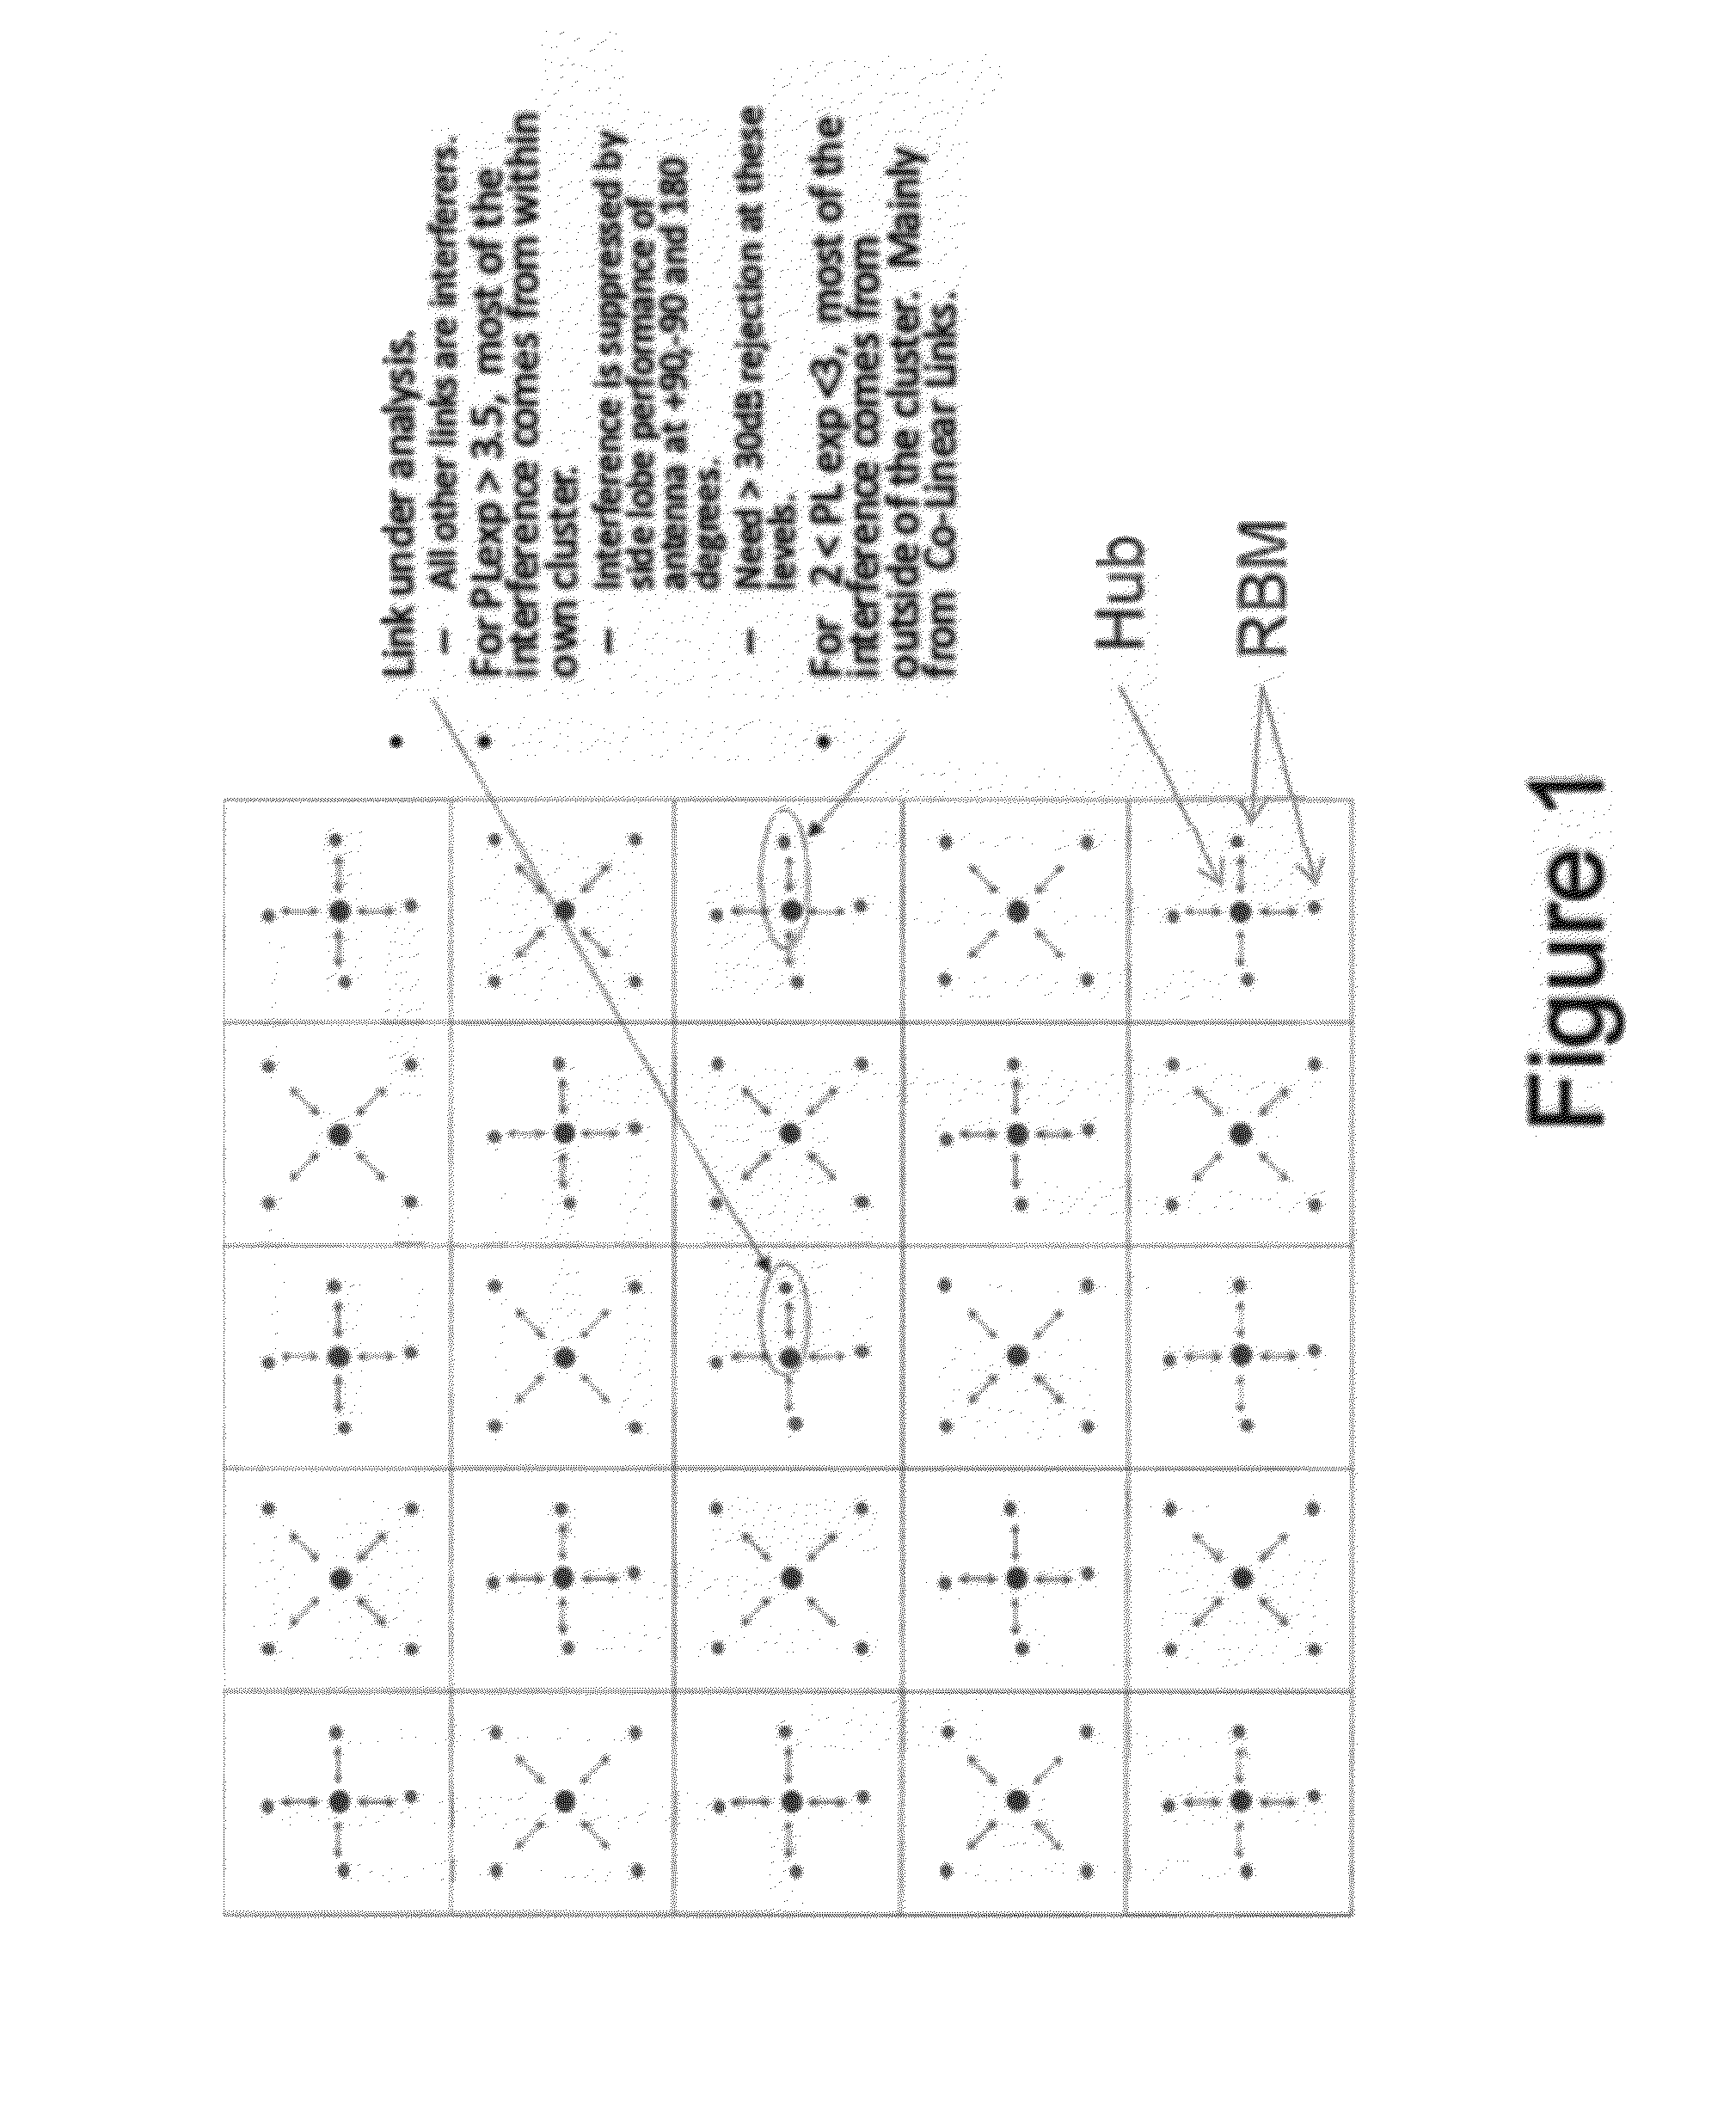 System and Method for Co-Channel Interference Measurement and Managed Adaptive Resource Allocation for Wireless Backhaul